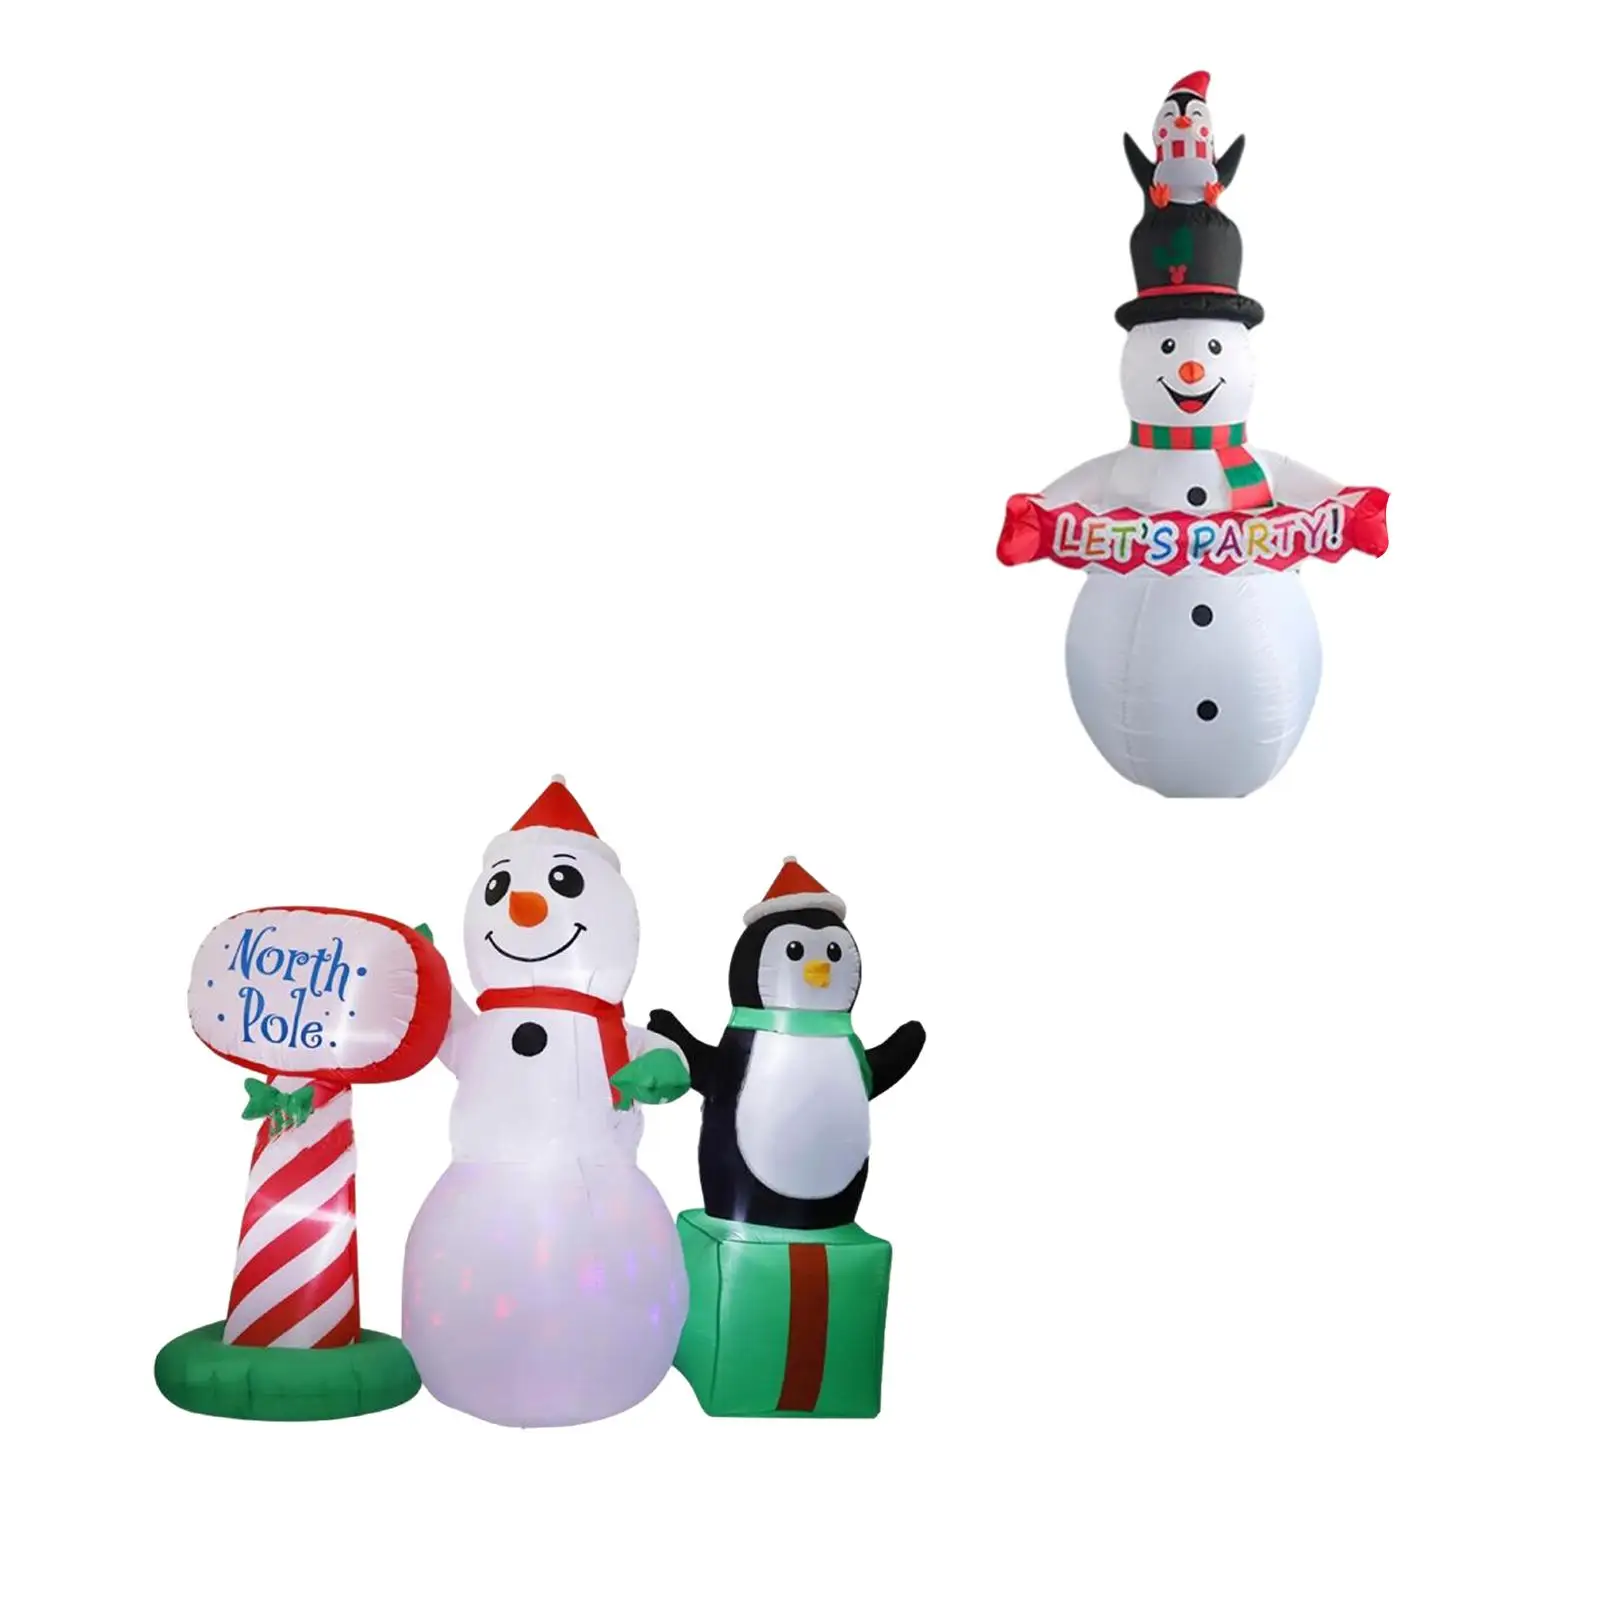 Blow up Snow Man with LED Lights Ornament Funny Luminous Christmas Inflatable Snowman for Patio Vacation Indoor Outside Outdoor